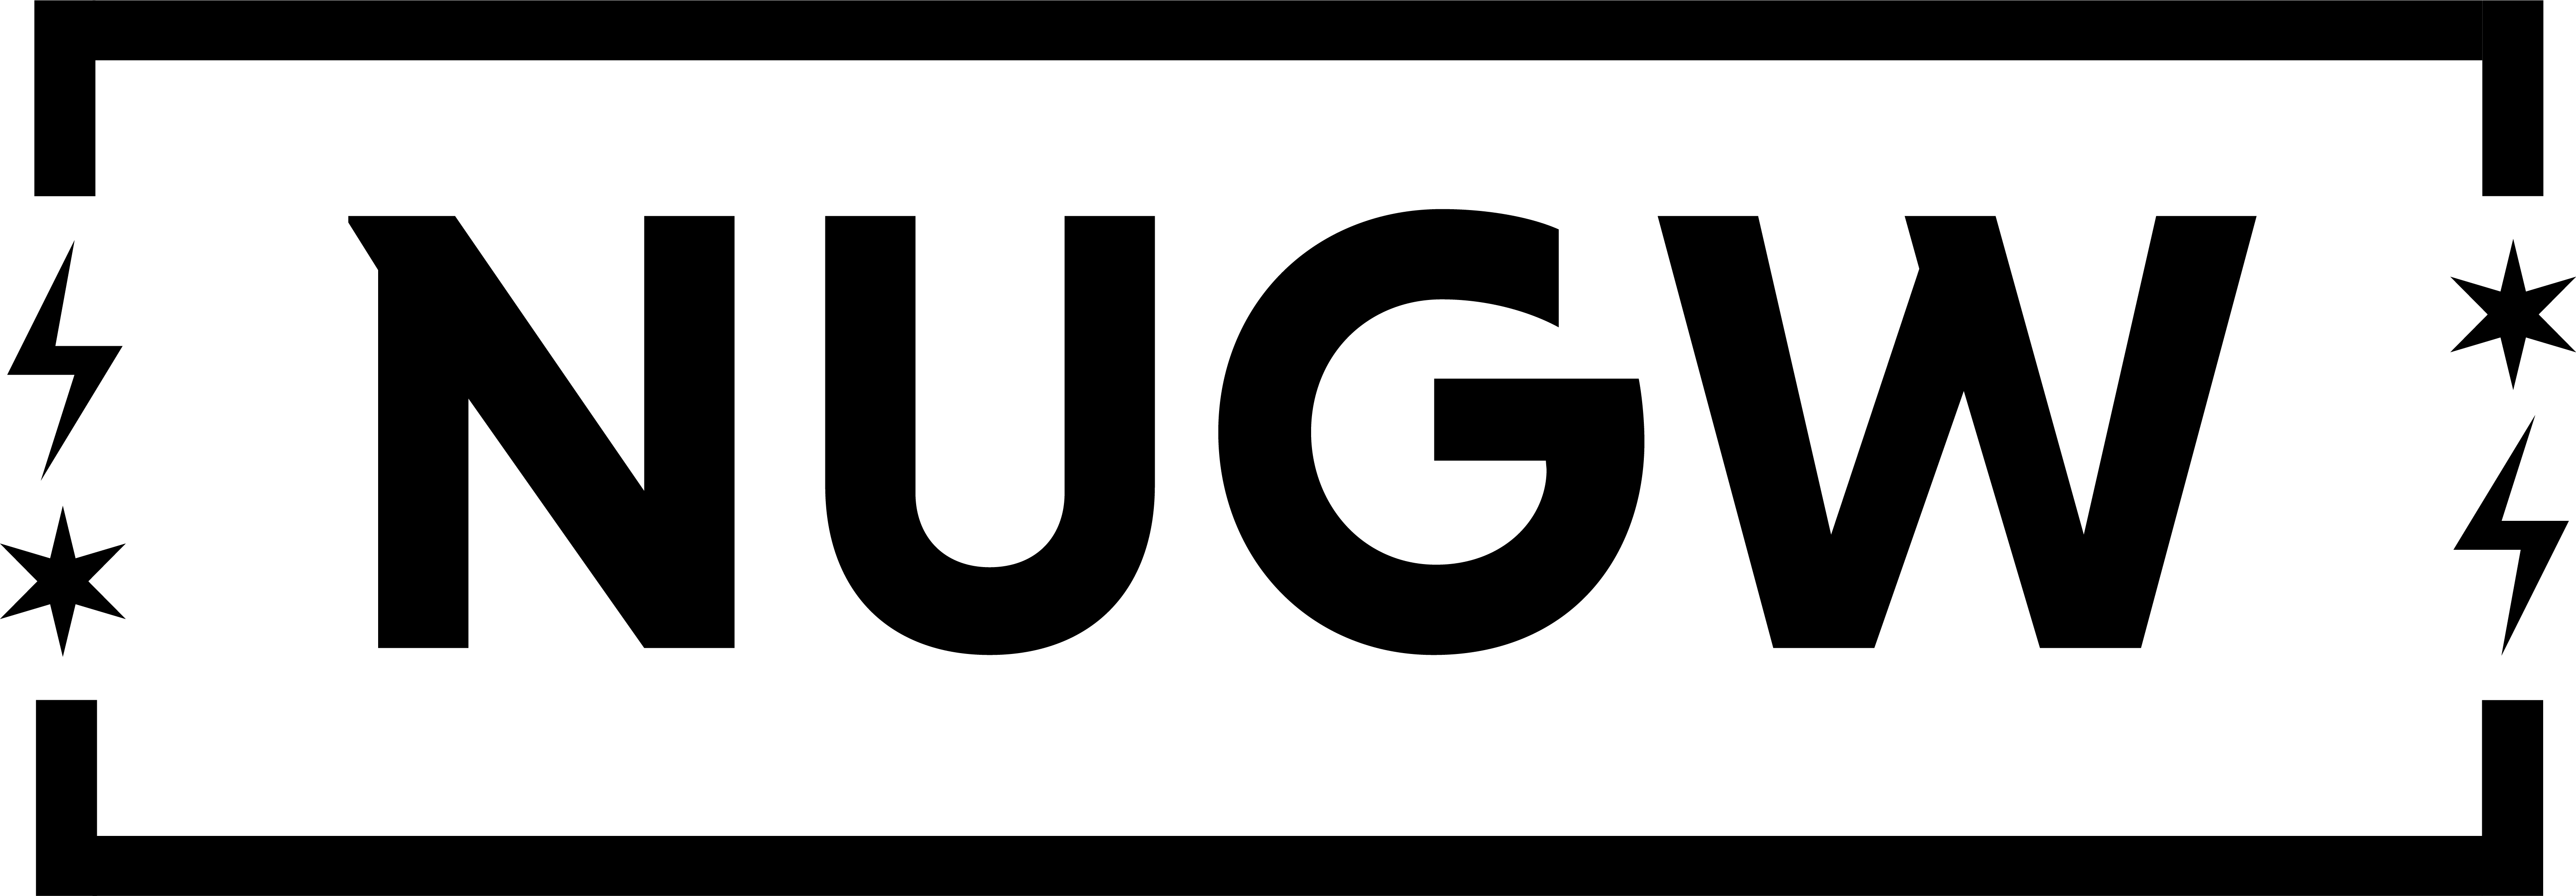 The NUGW monogram. The letters N. U. G. W in bold black font, surrounded by a black box. On the left and right sides of the box, there is a space with the Chicago star and a lightning bolt.